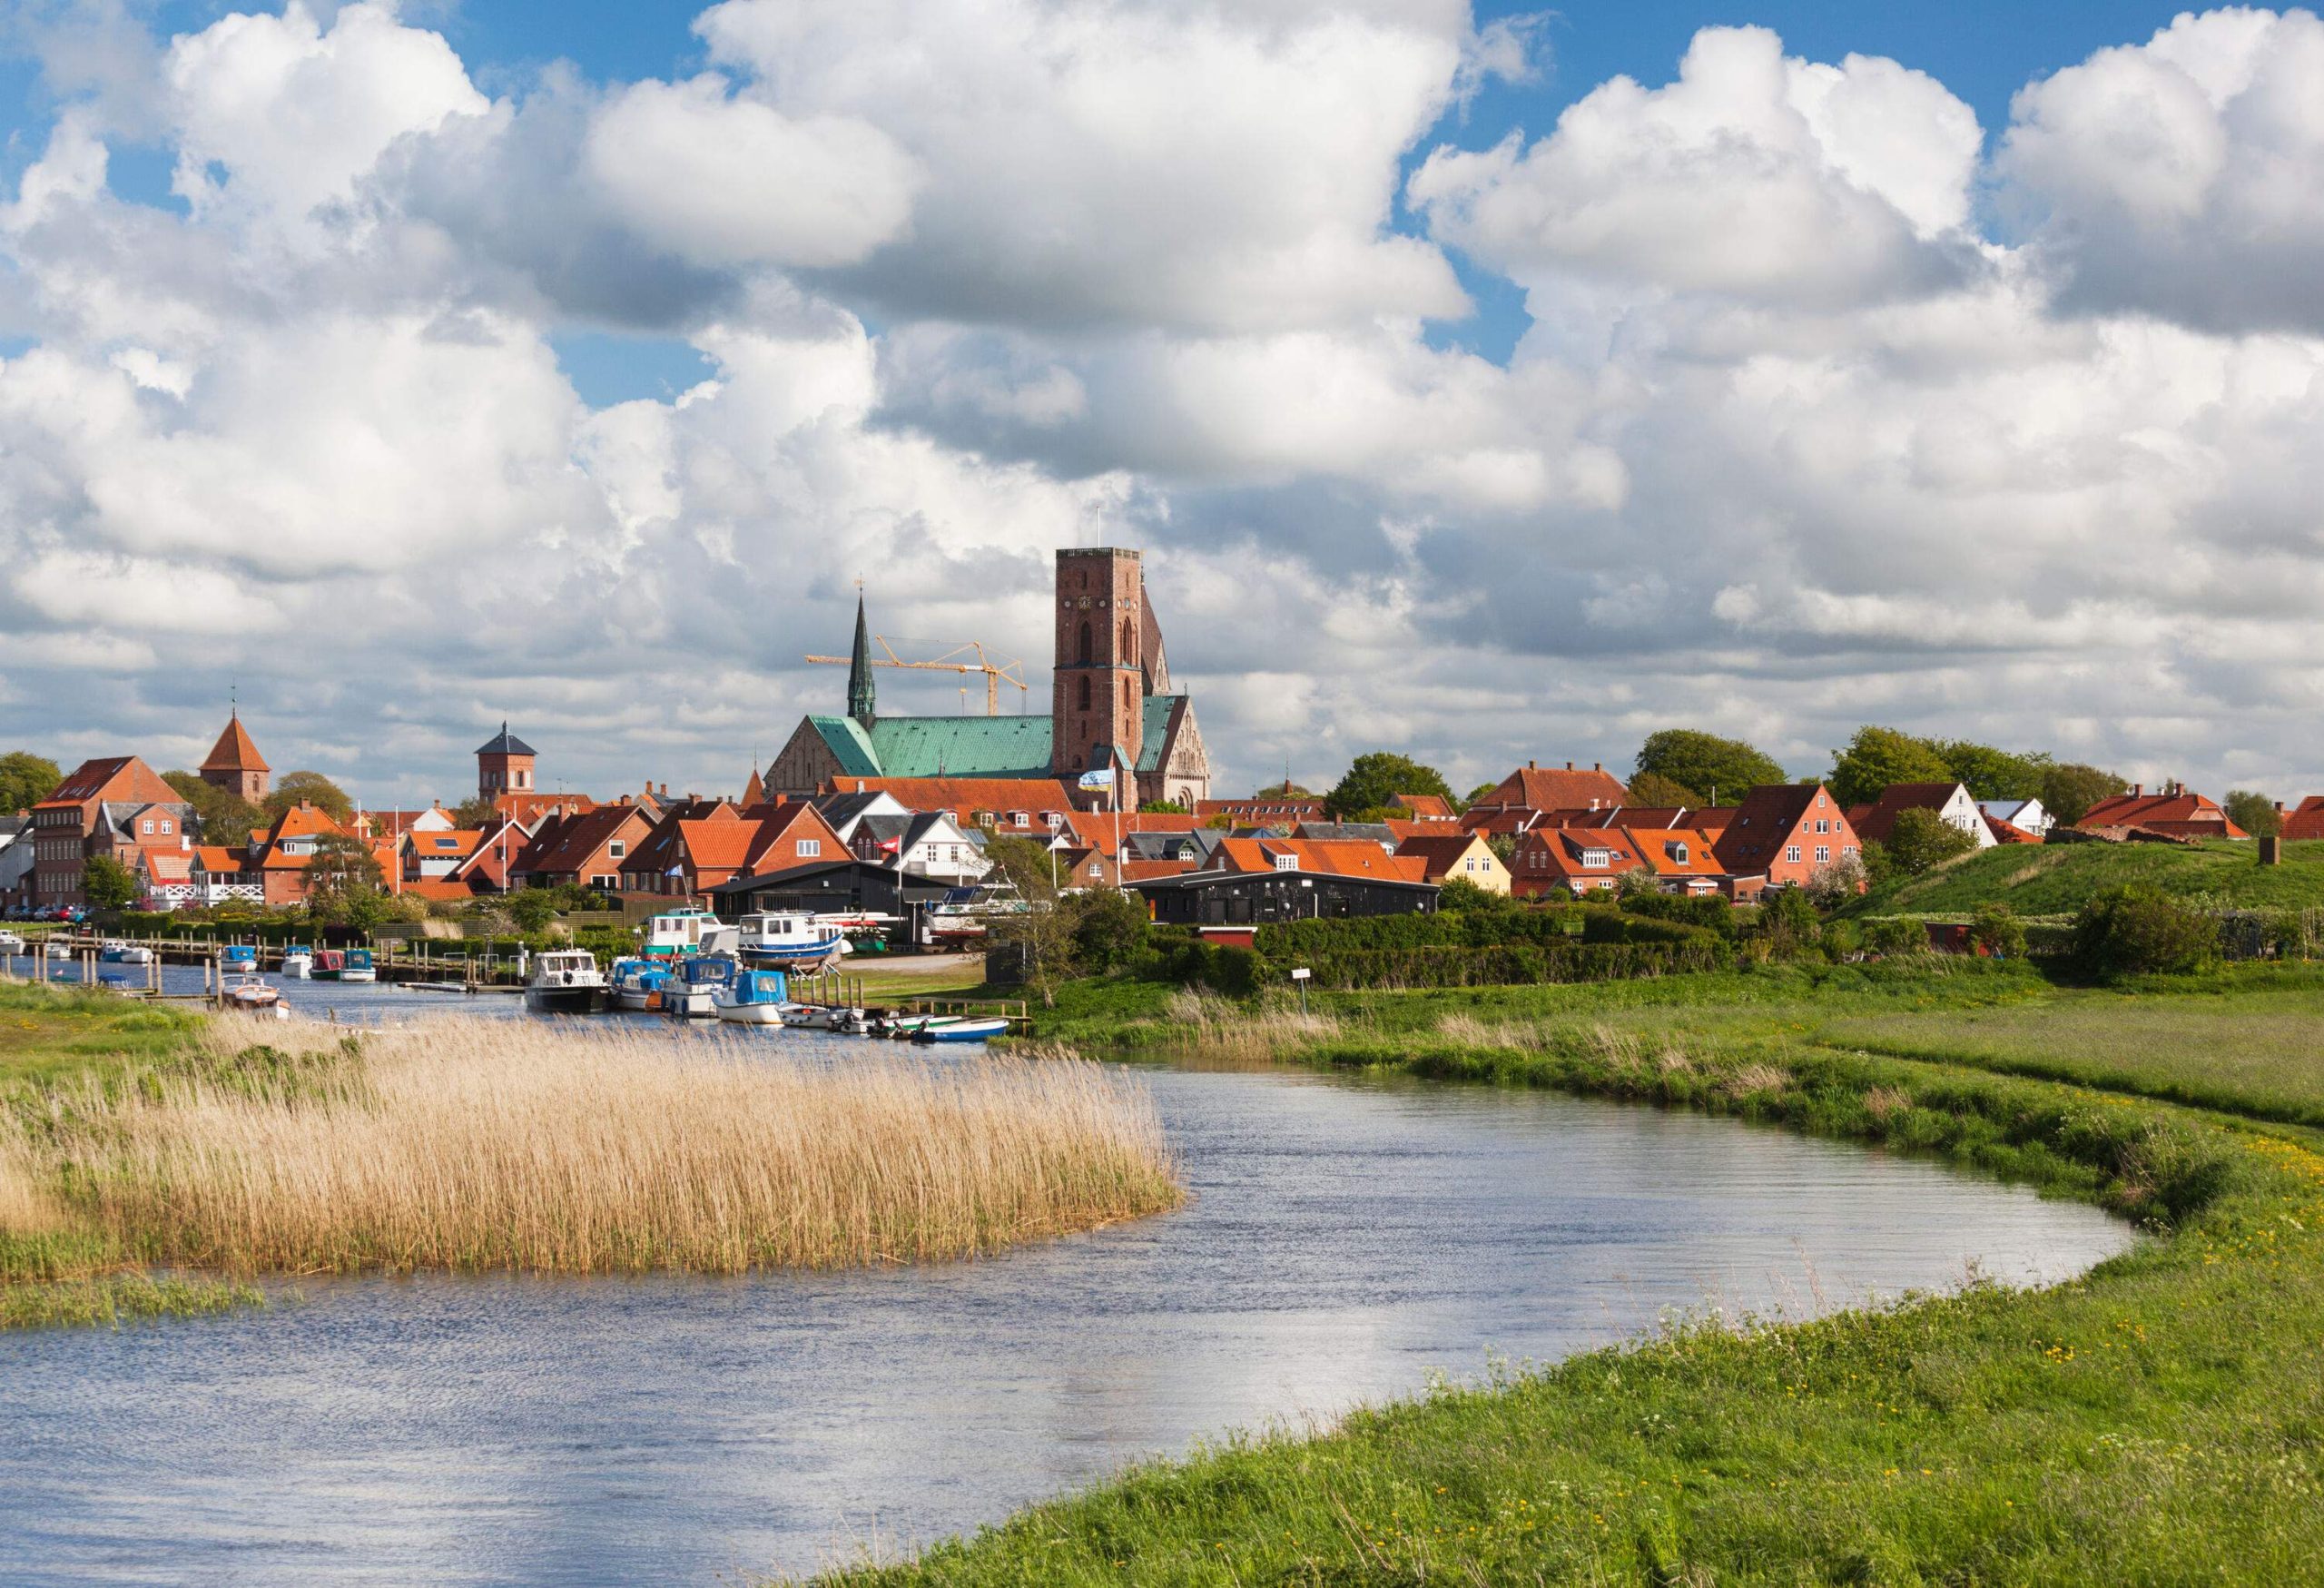 A church's square tower rises above a townscape as seen from a grassy river with anchored boats.